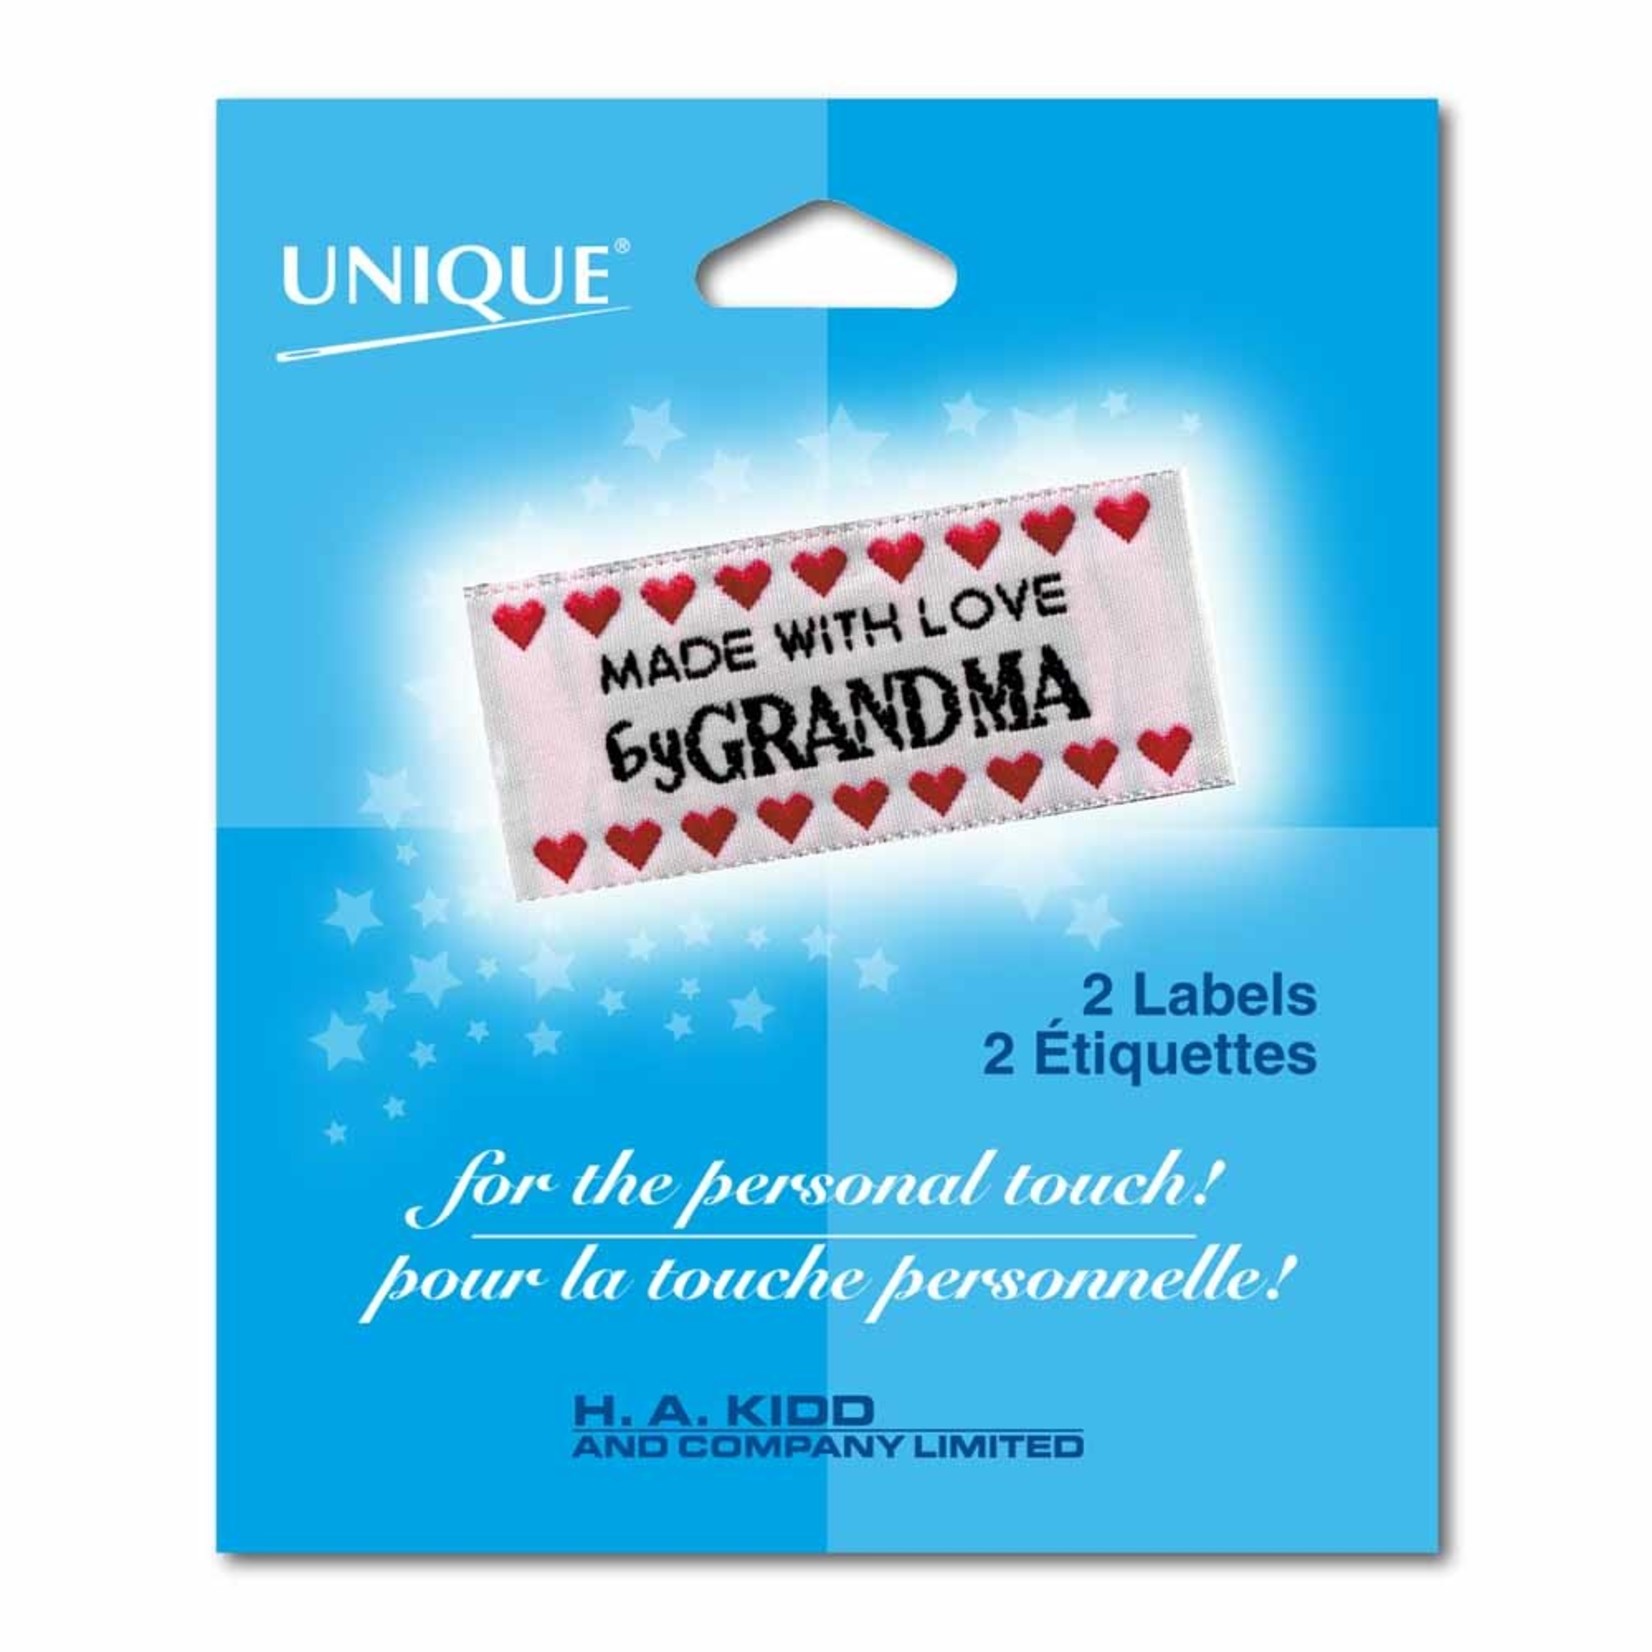 UNIQUE MADE WITH LOVE BY GRANDMA LABEL